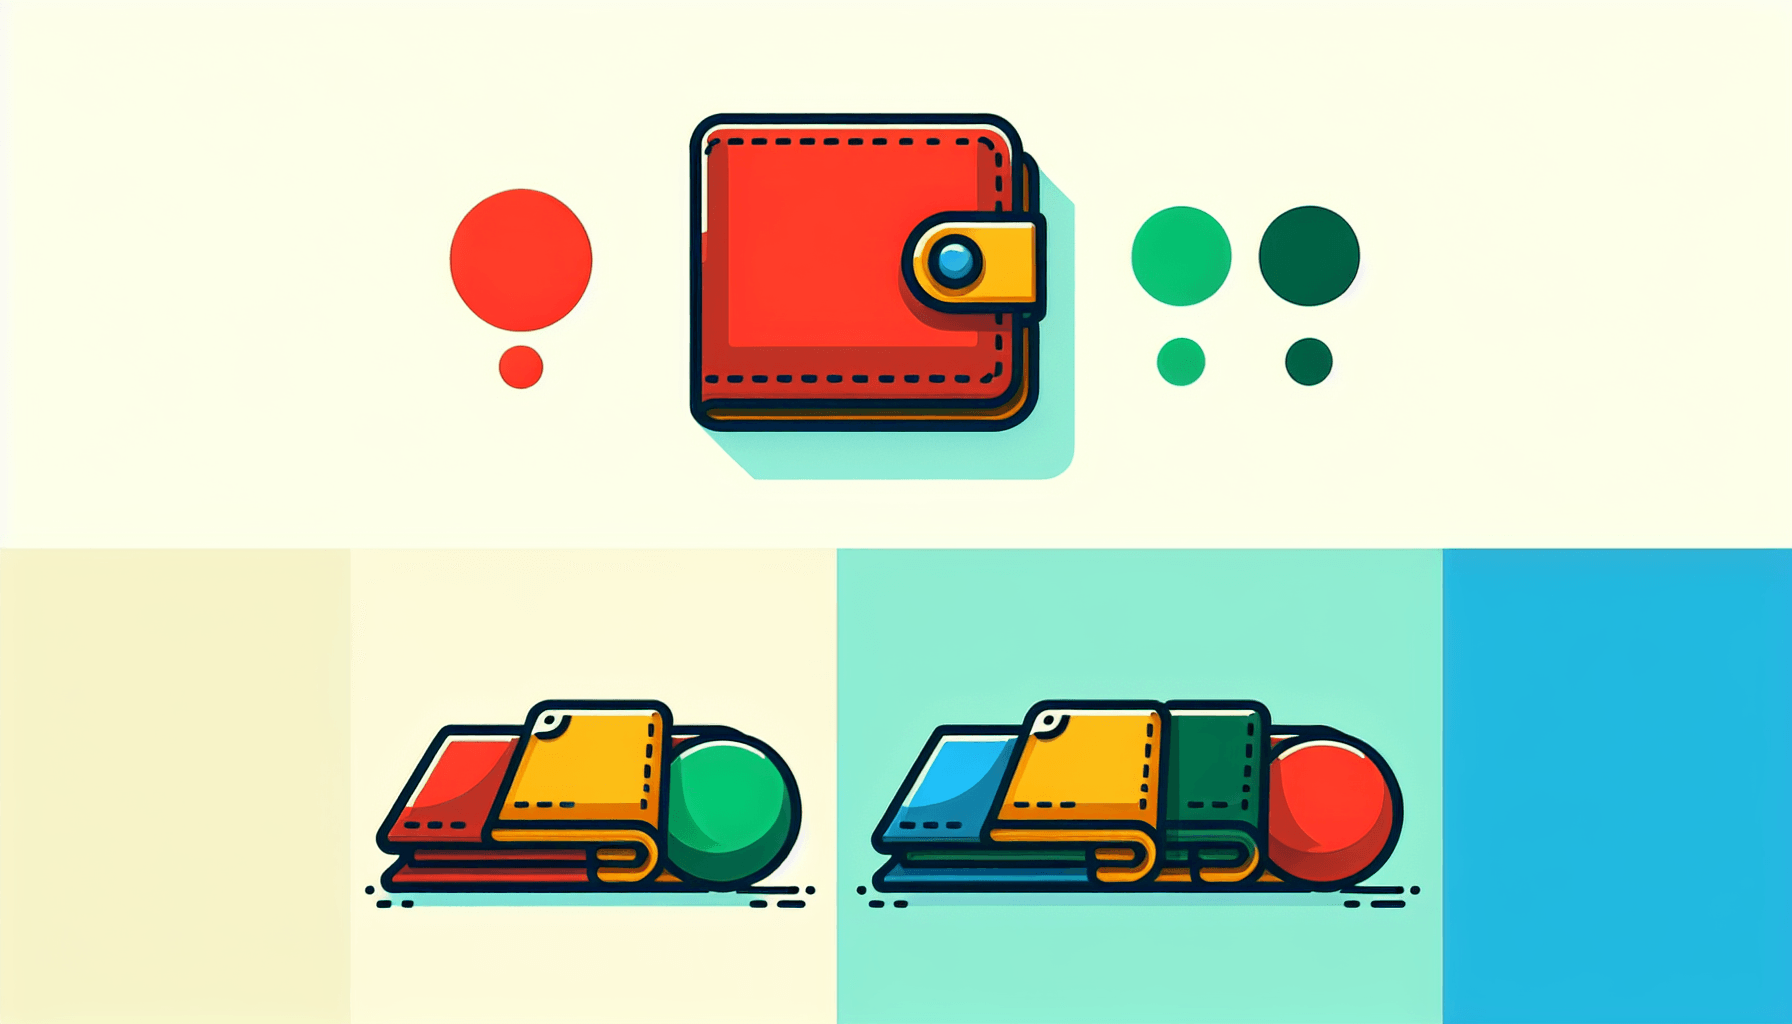 Wallet in flat illustration style and white background, red #f47574, green #88c7a8, yellow #fcc44b, and blue #645bc8 colors.